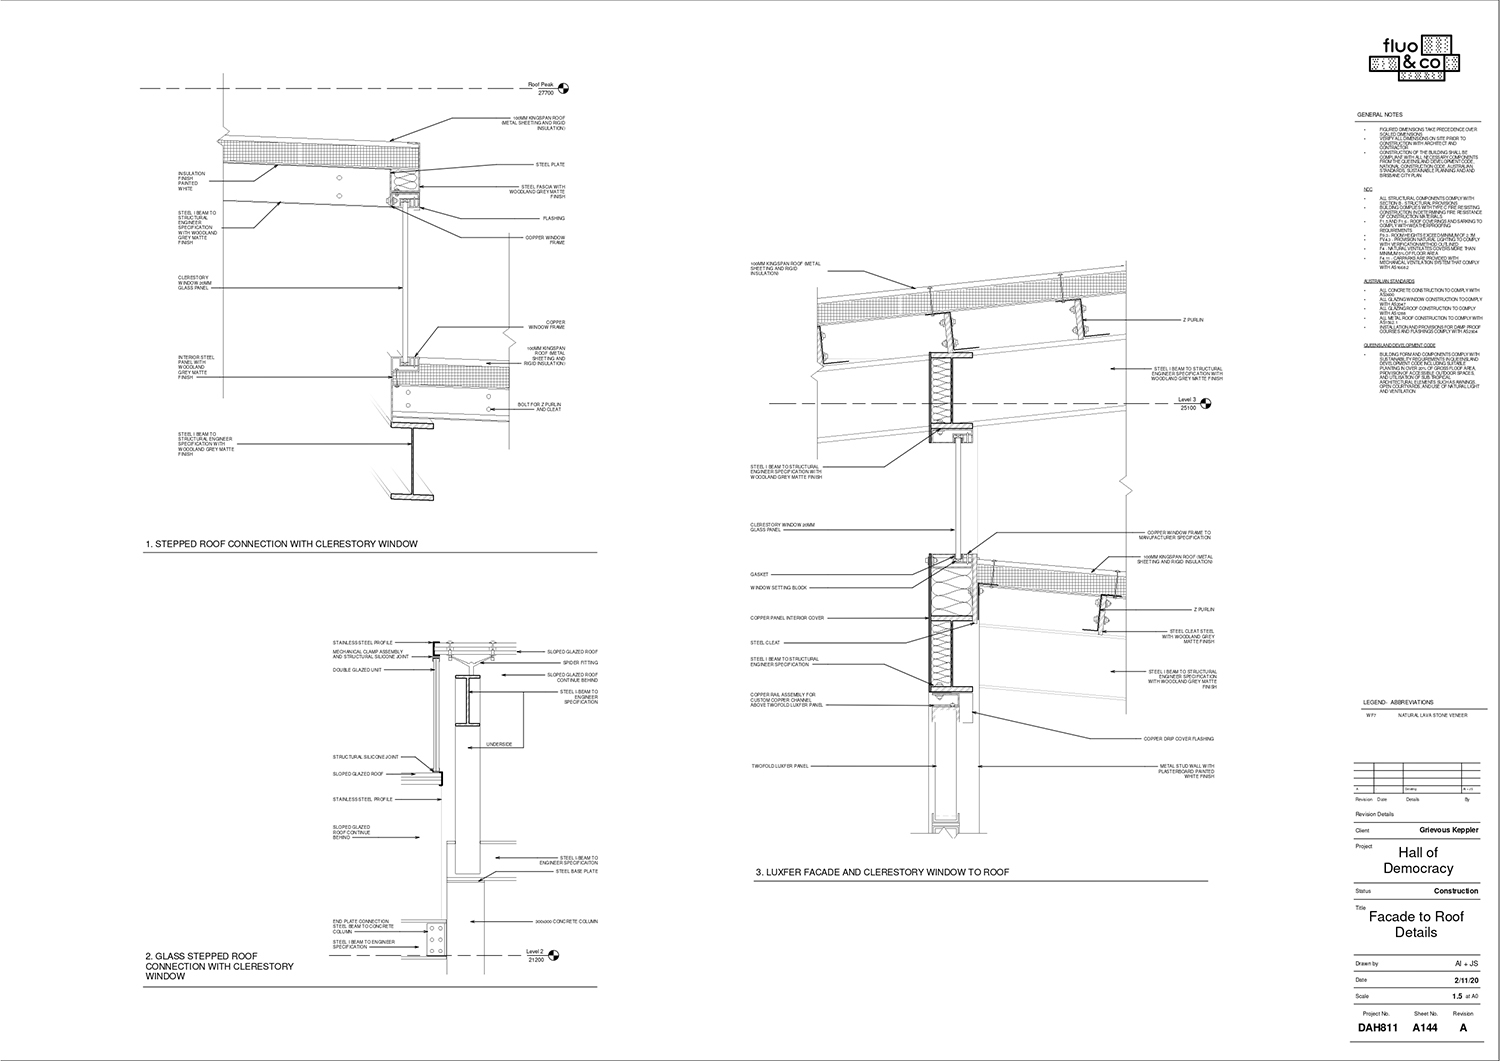 Facade to roof details - documentation